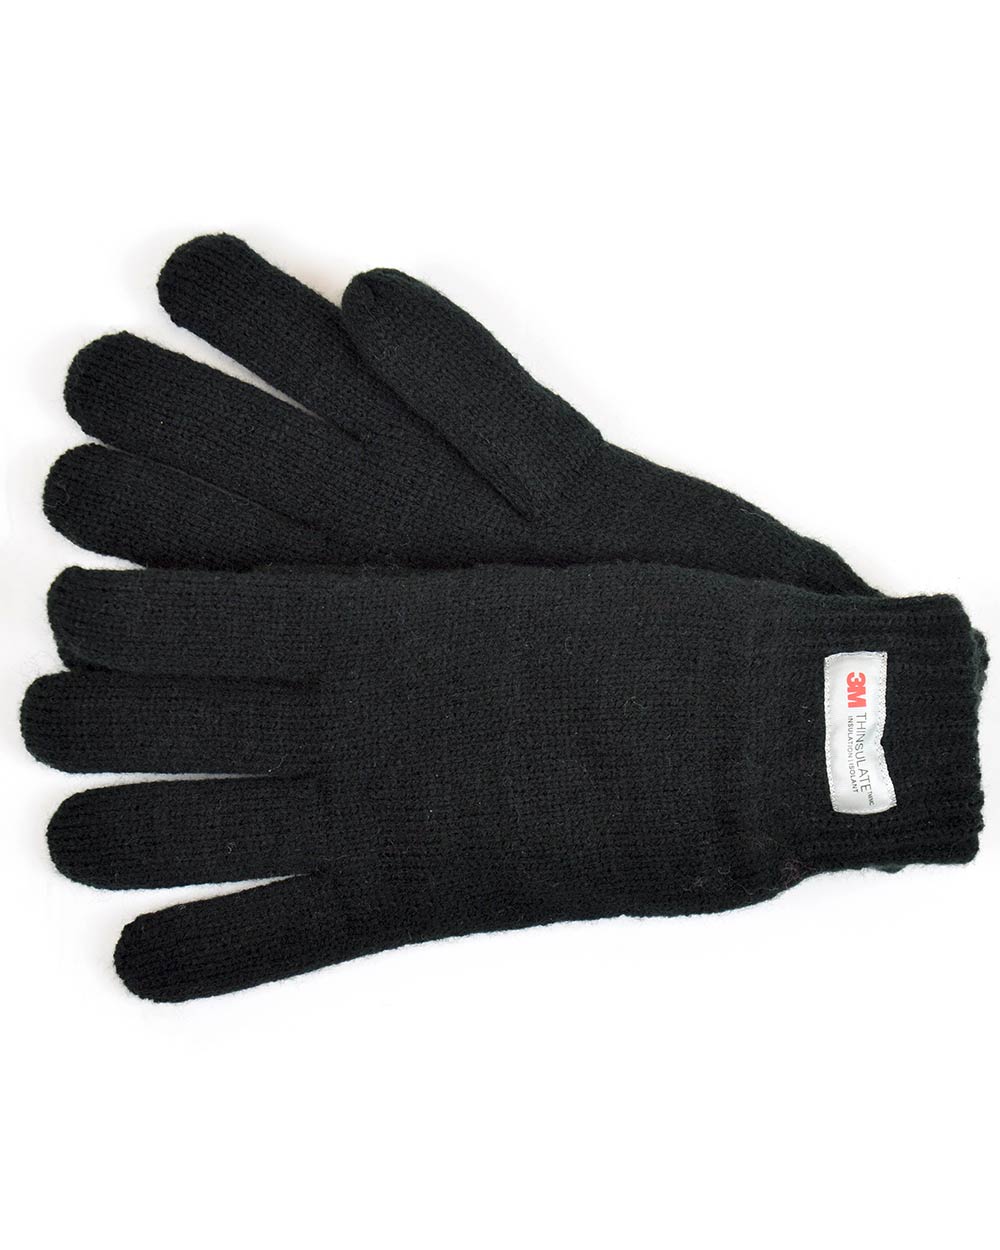 Men's Thermal Gloves Thinsulate Black